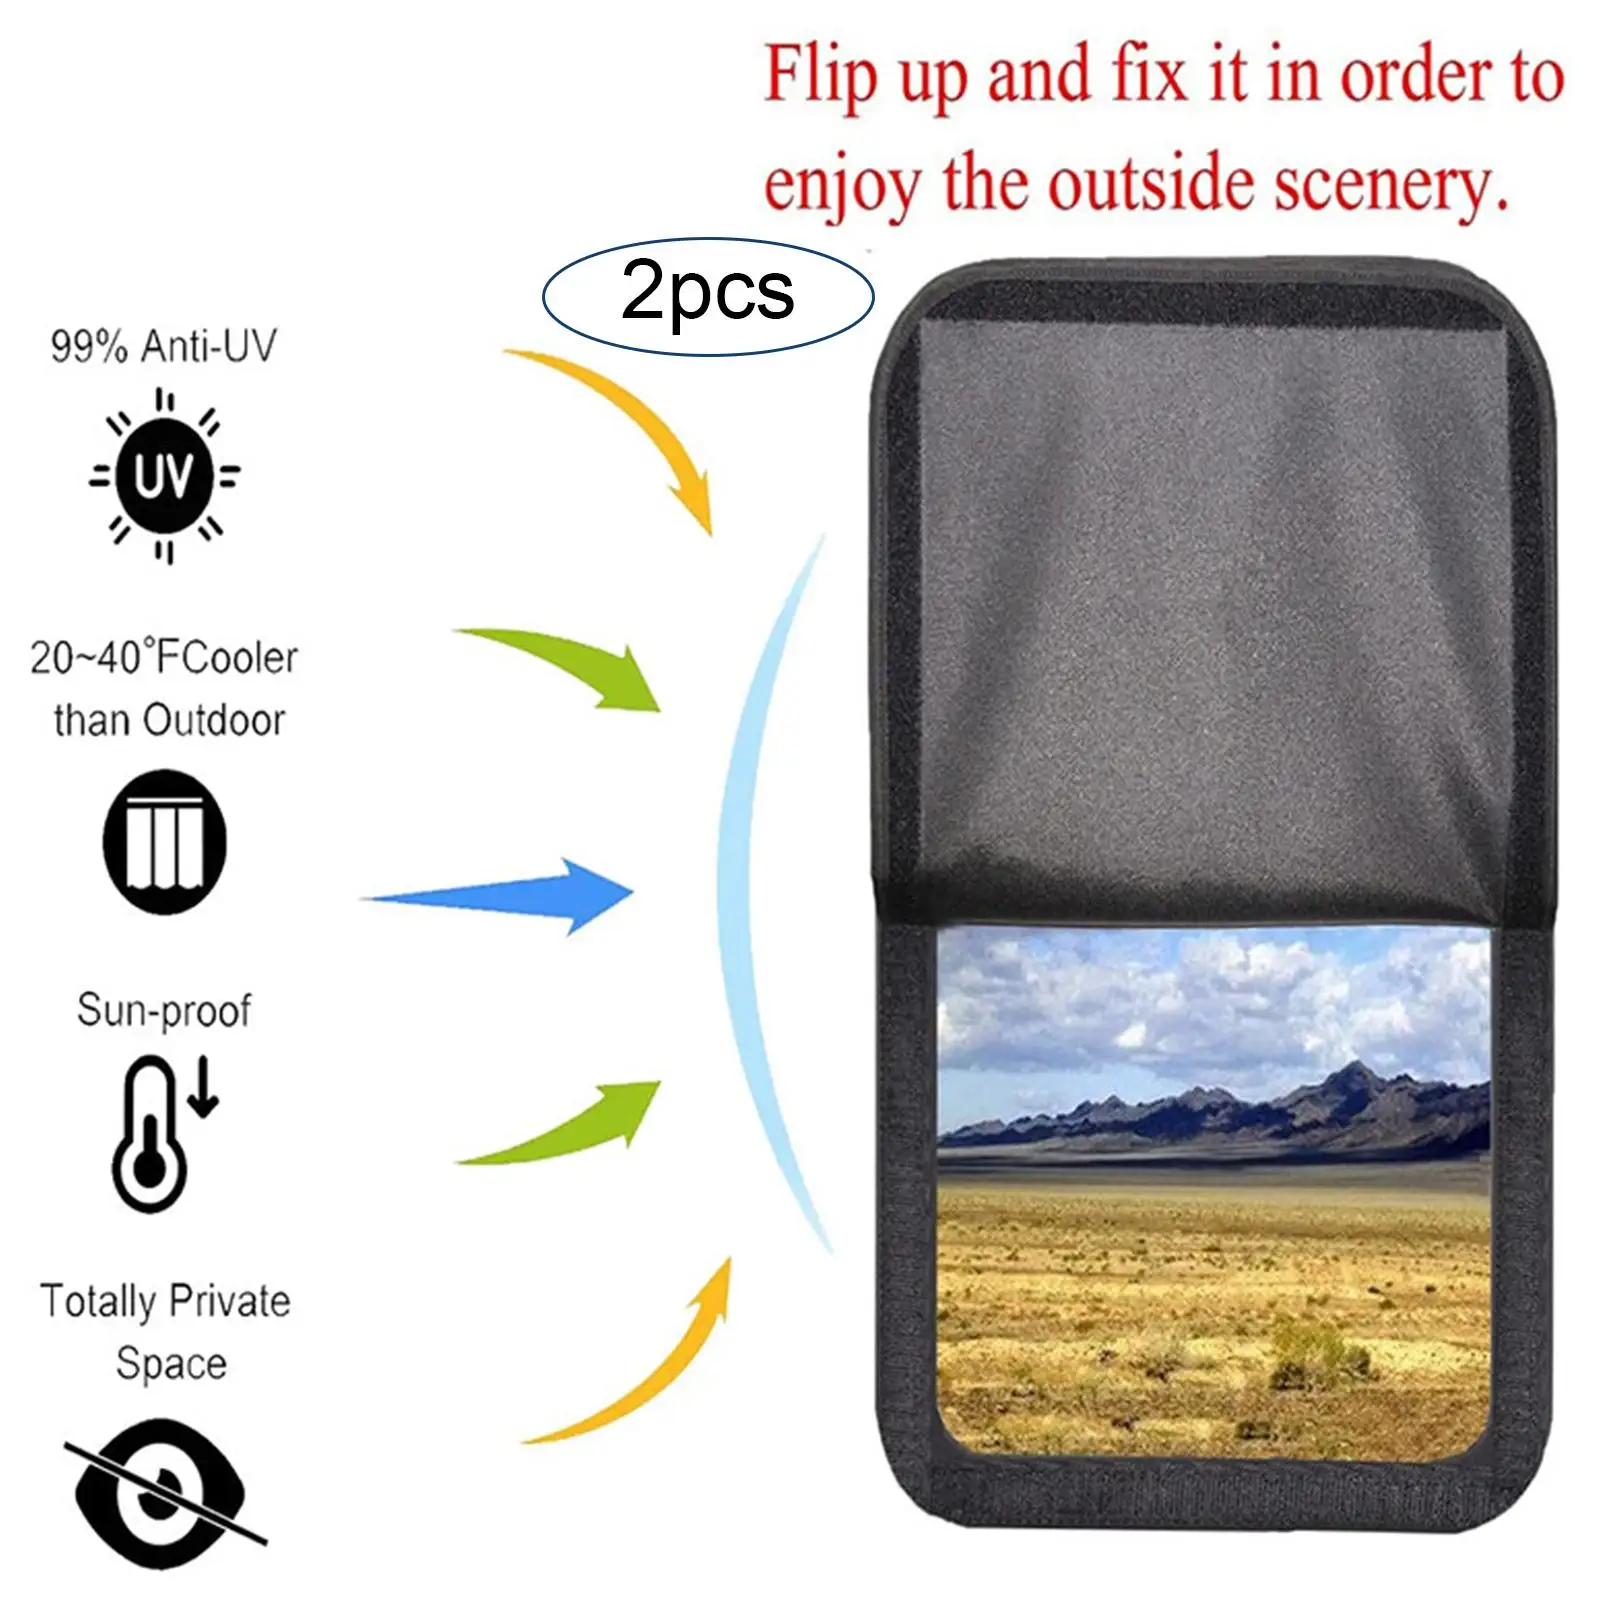 Door Window Fabric Windshield Collapsible Sunshade for Campers Travel Trailers Rvs